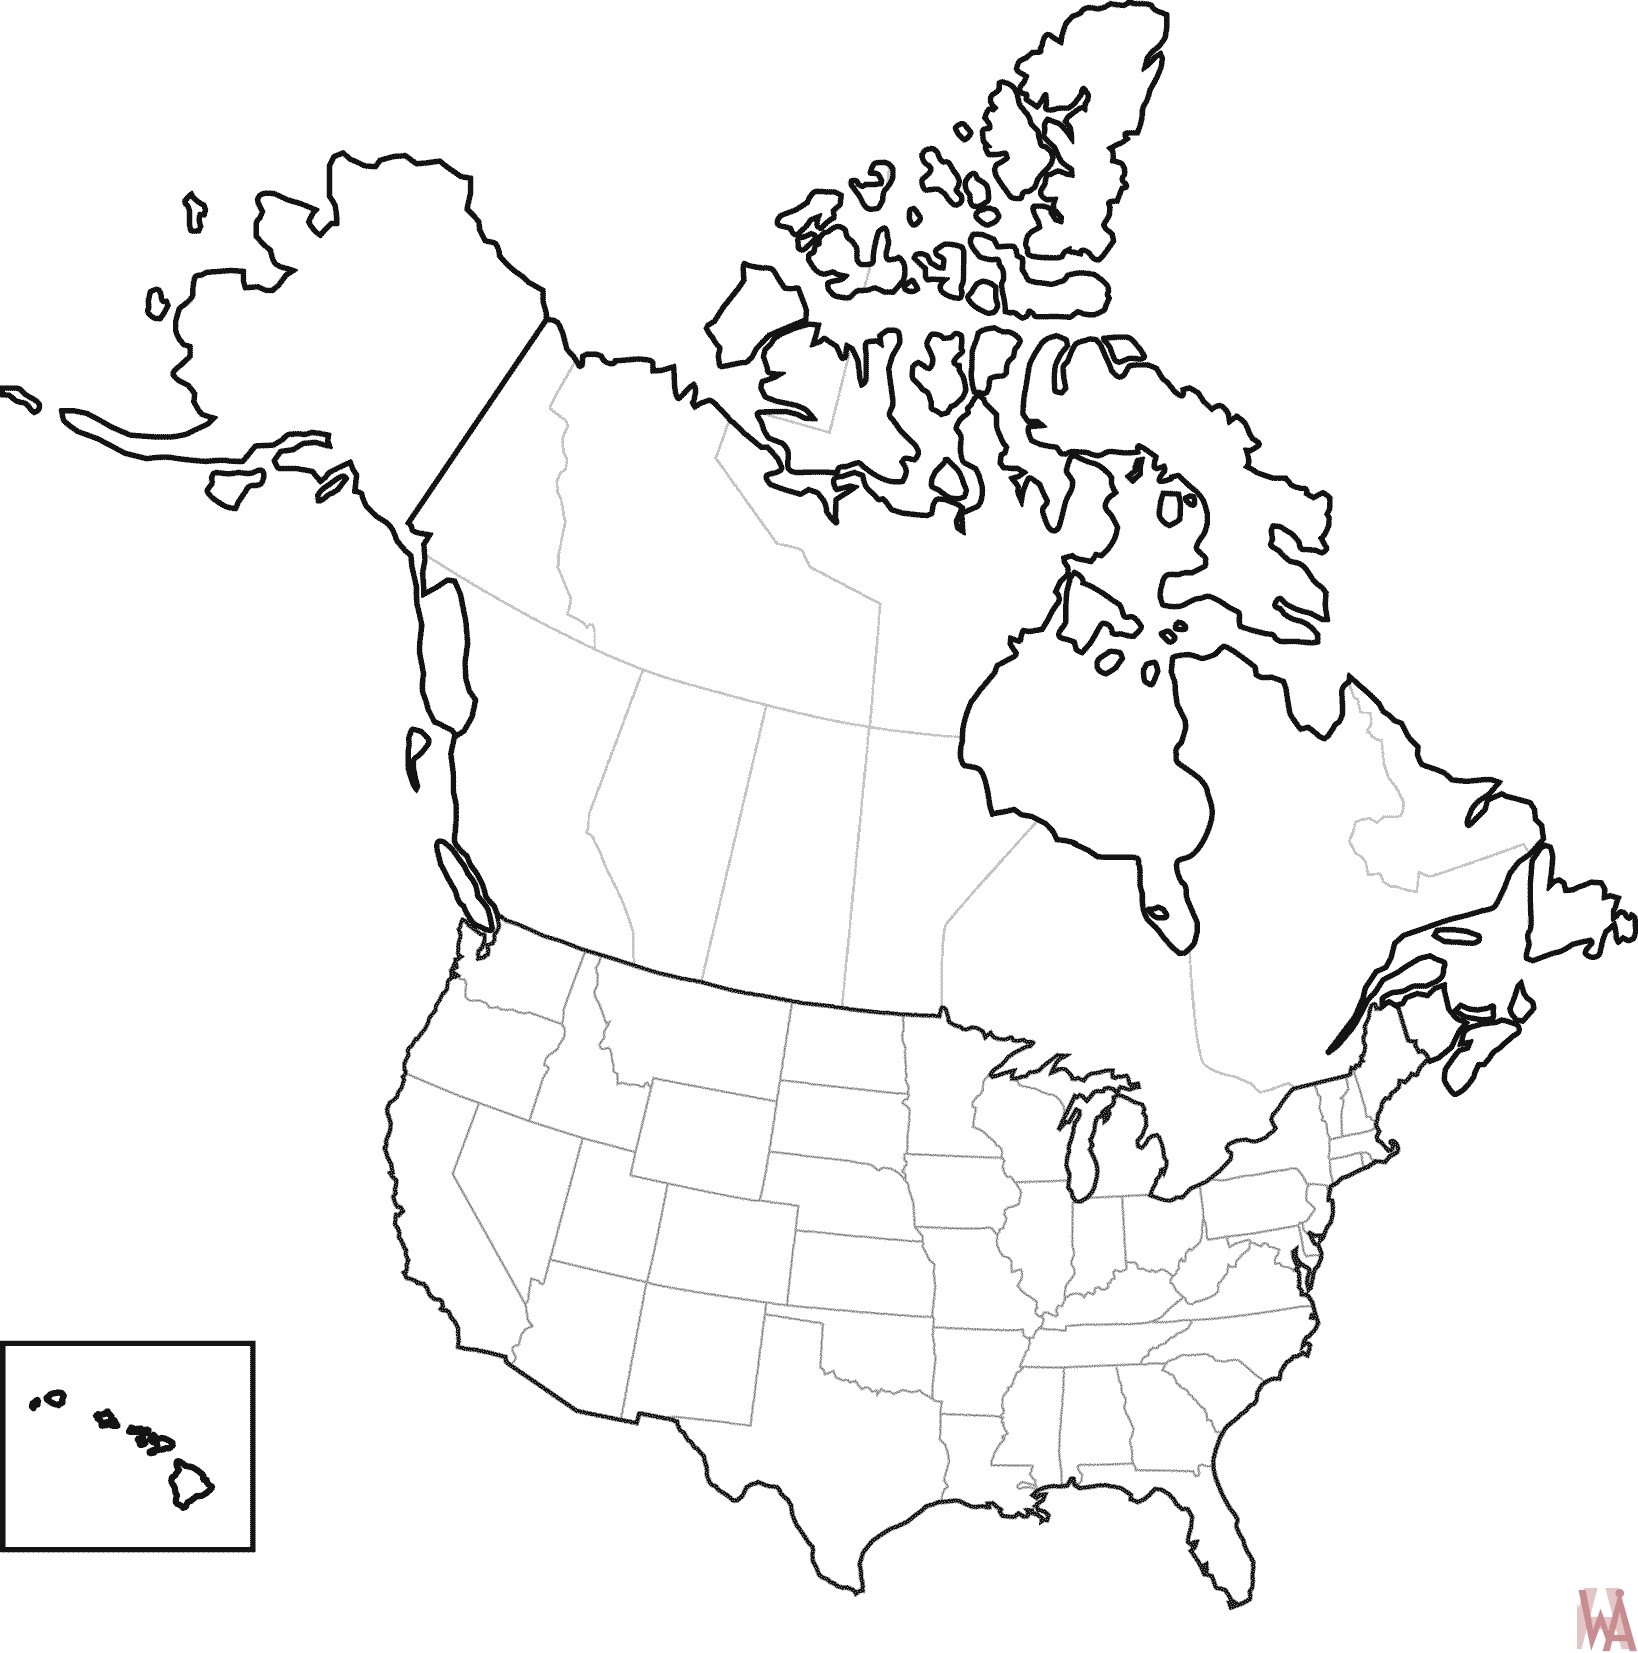 blank us and canada map Blank Outline Map Of The United States And Canada Whatsanswer blank us and canada map